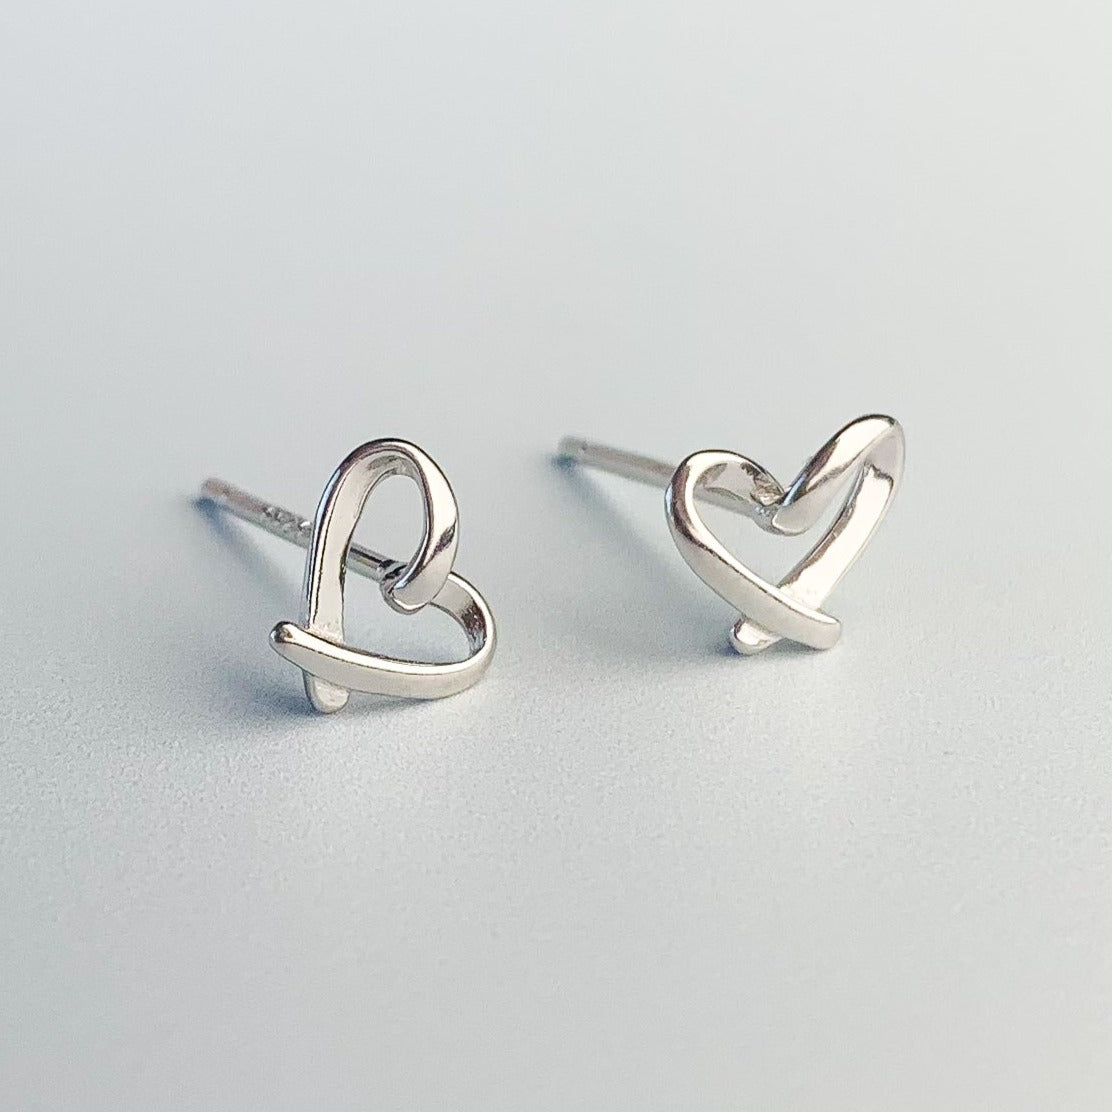 Close up of silver heart stud earrings